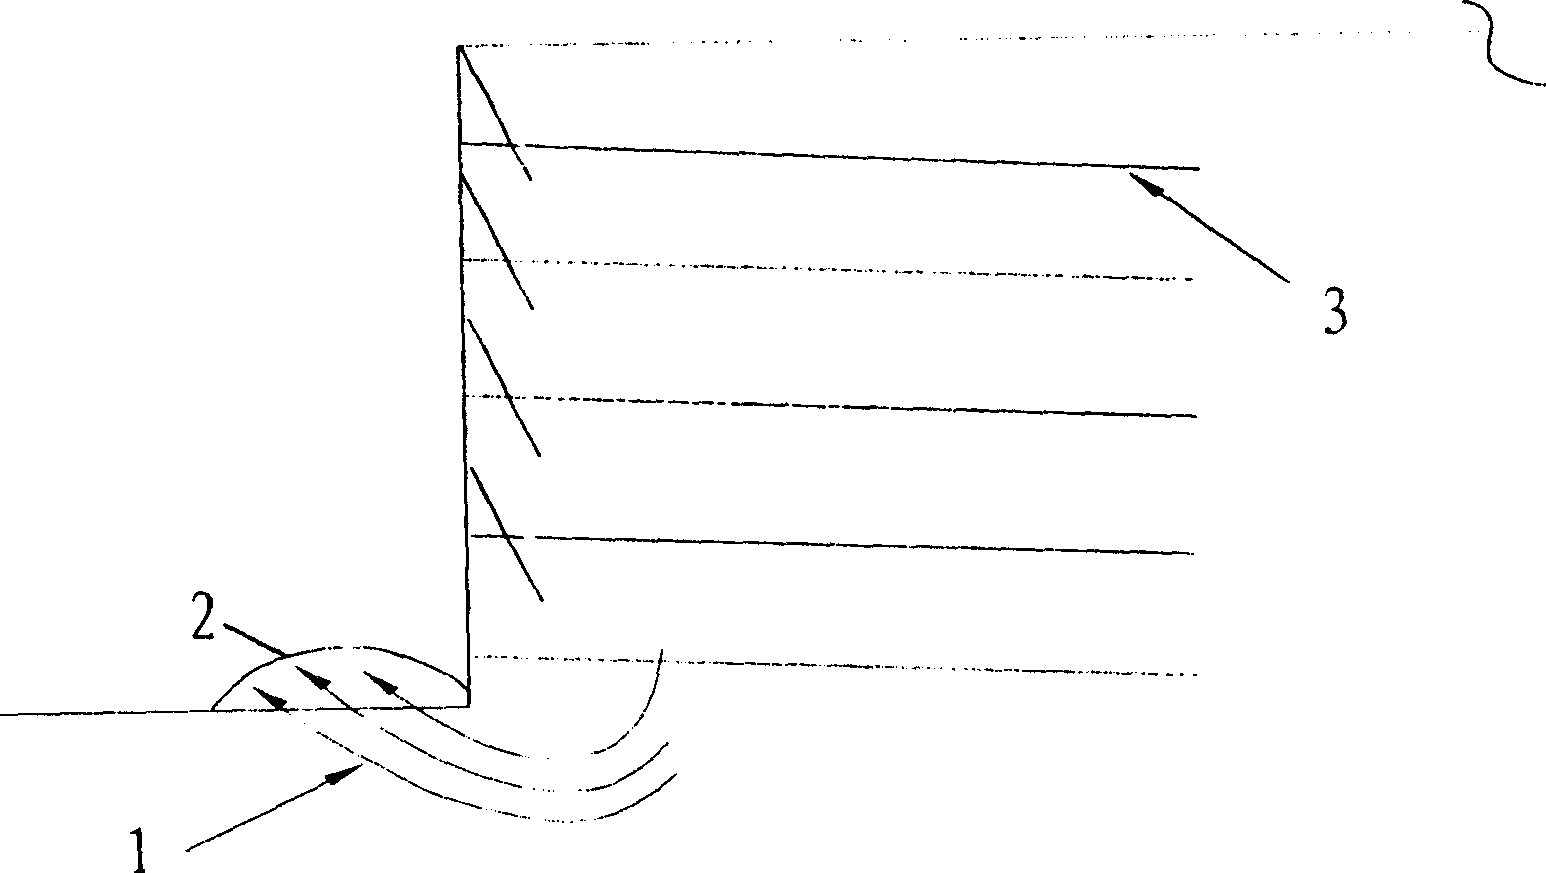 Operation method for supporting soft border by using earth slope nails